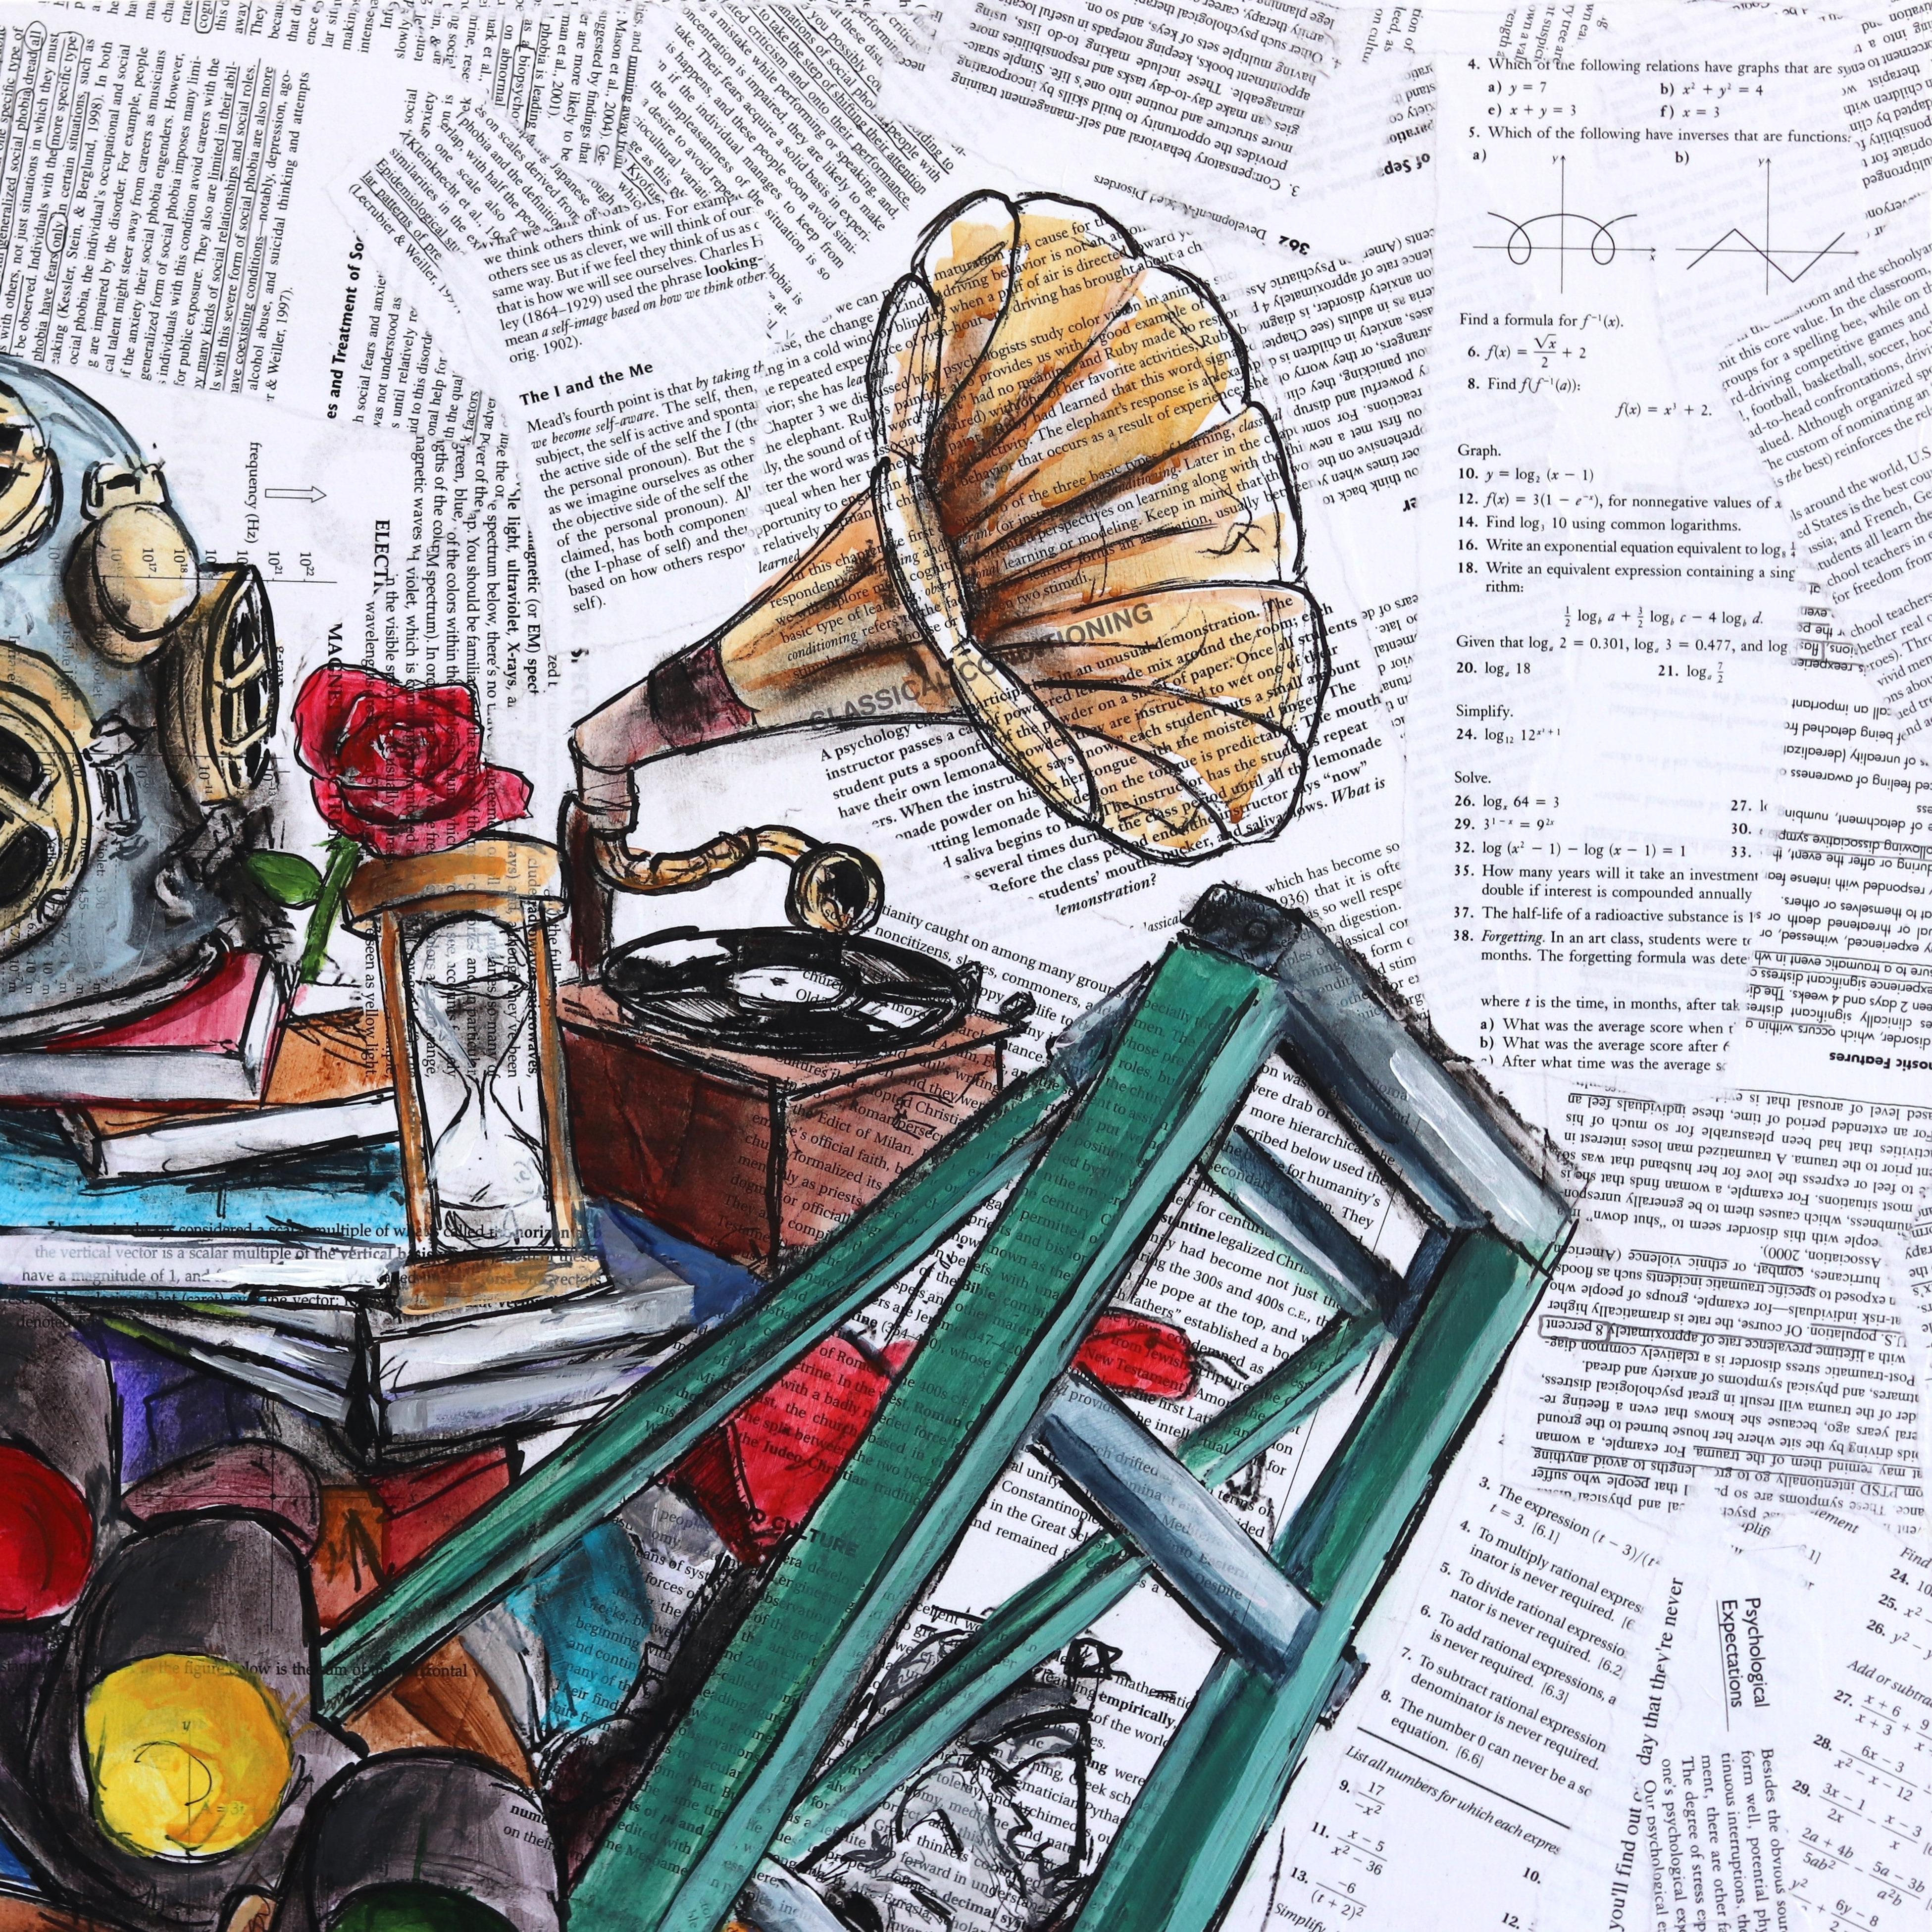 Robert Lebsack creates artworks using mixed media with ink, acrylic and charcoal on archival copies of newspaper or sheet music. His street art tends to focus on social and cultural issues using bits and pieces of headlines, articles and ads as the